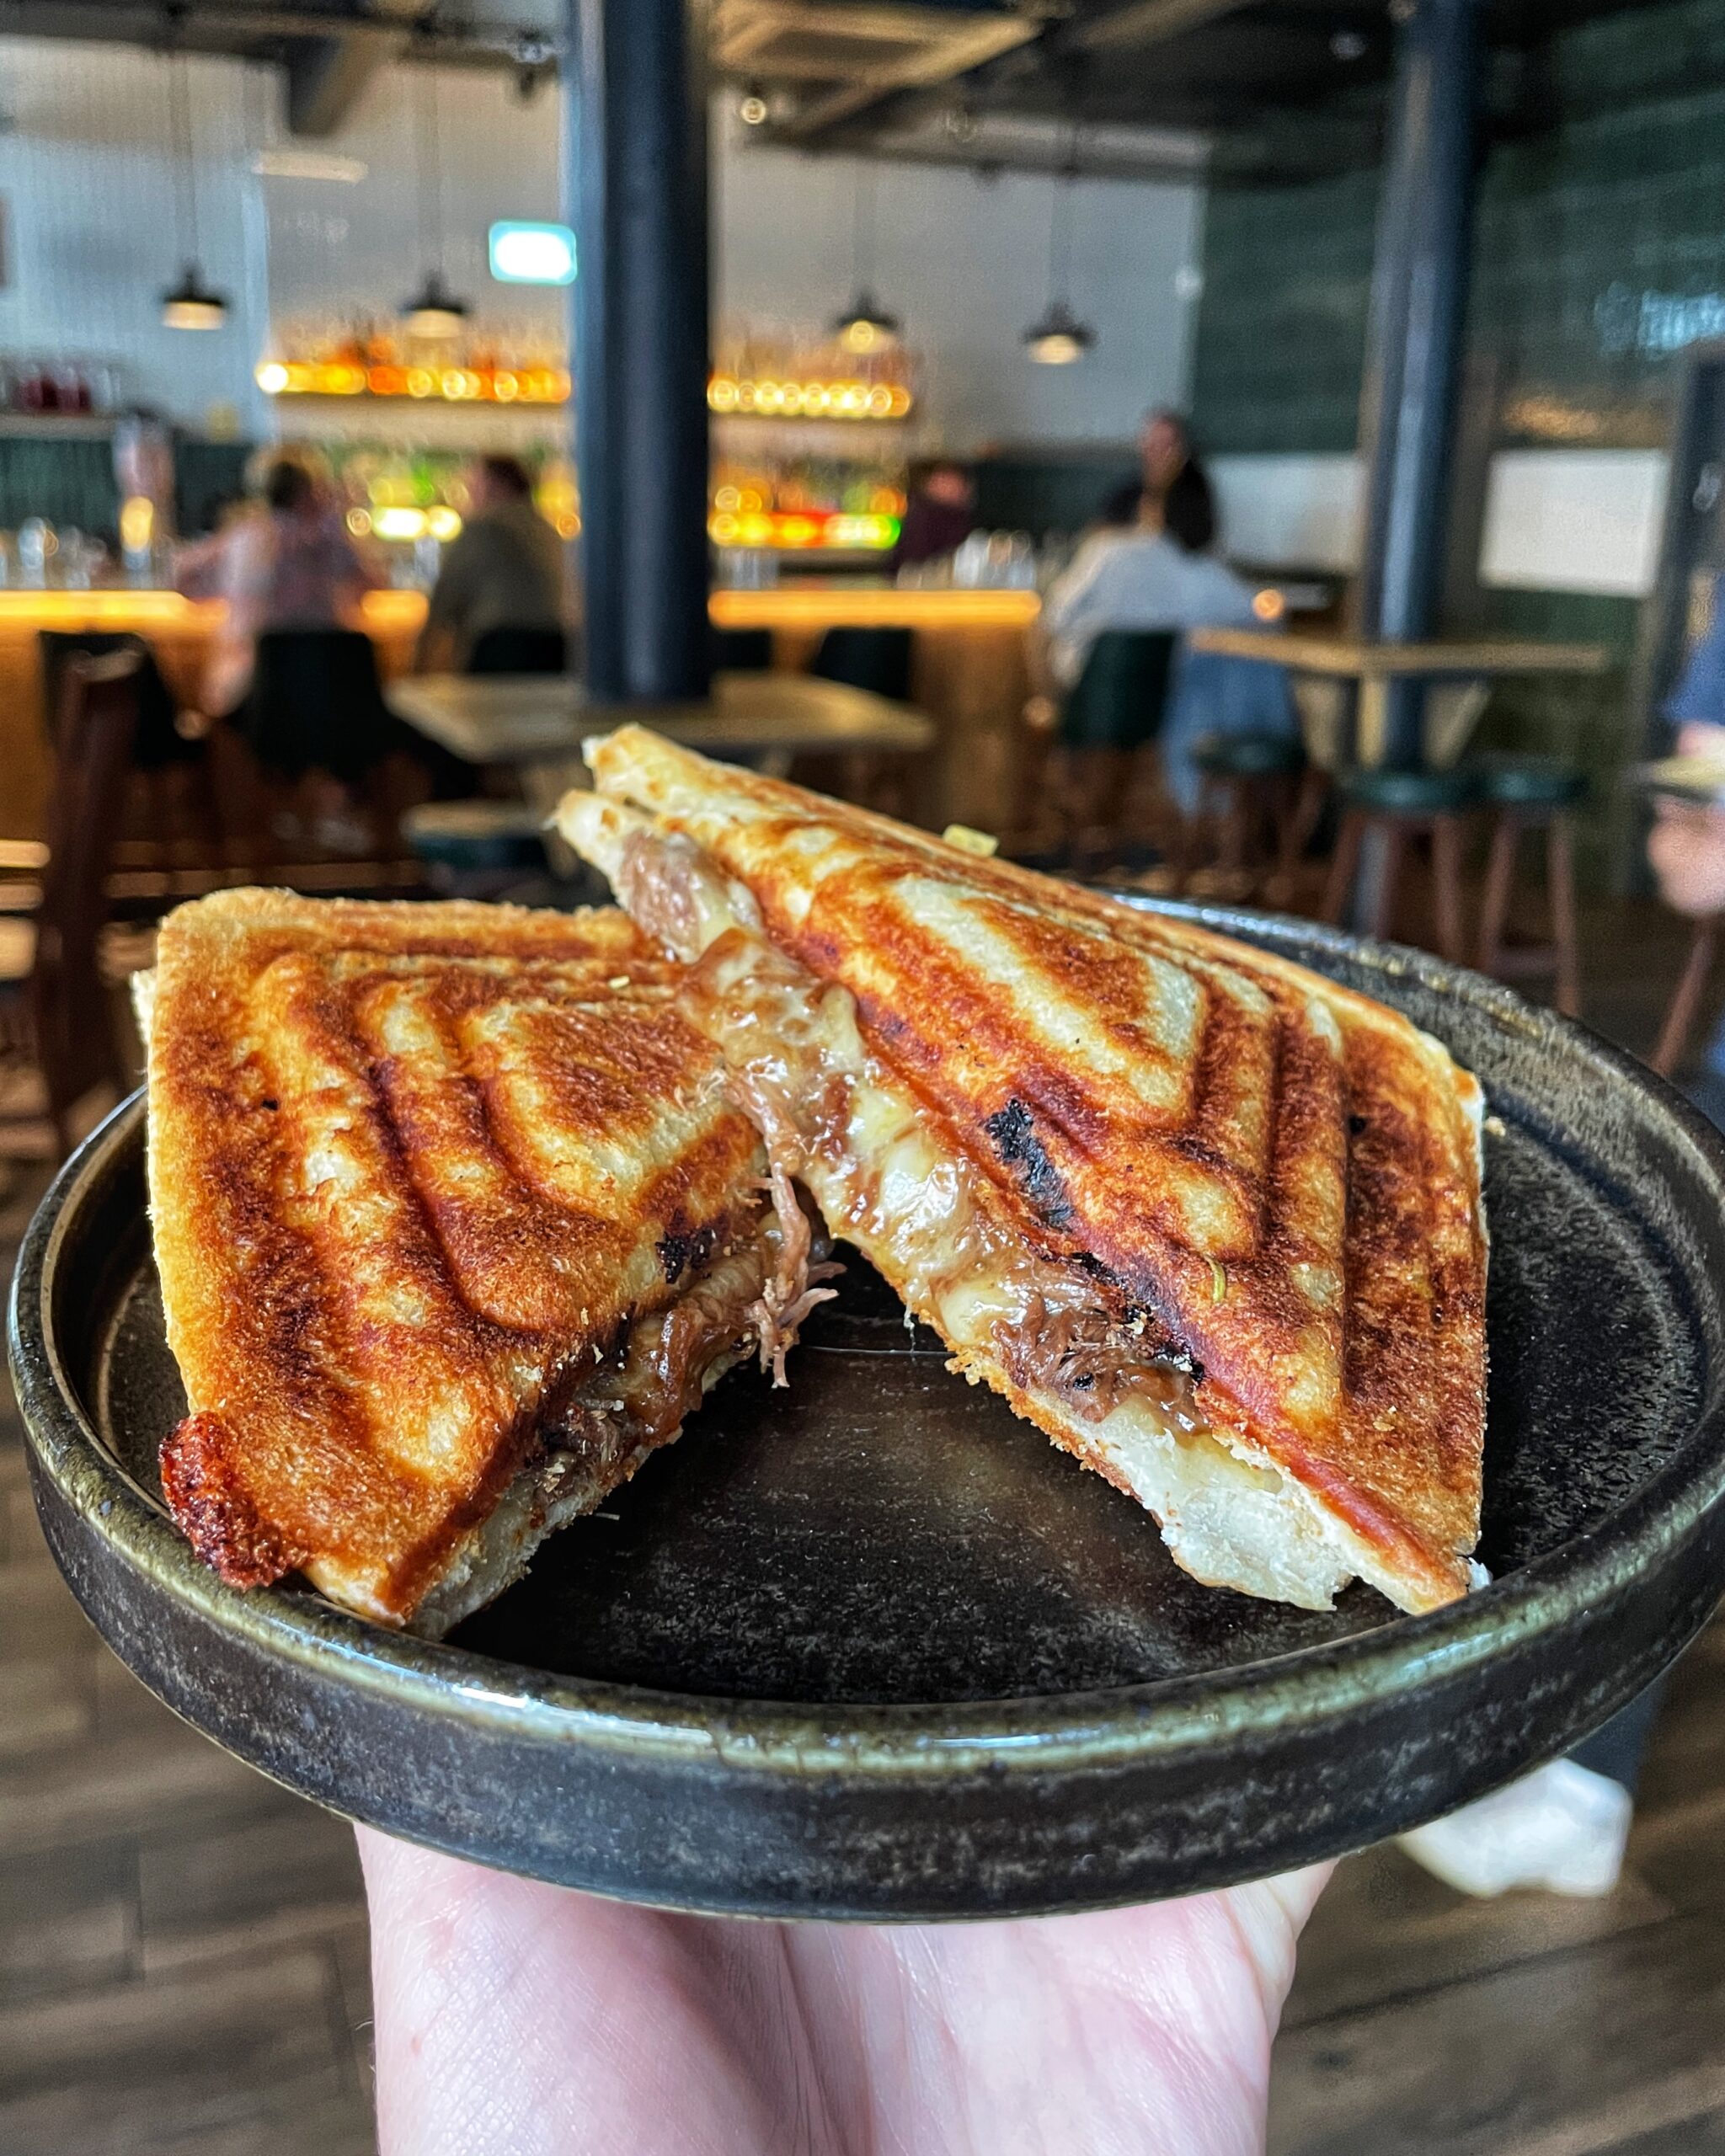 A braised beef and red onion toastie at Blinker in Manchester